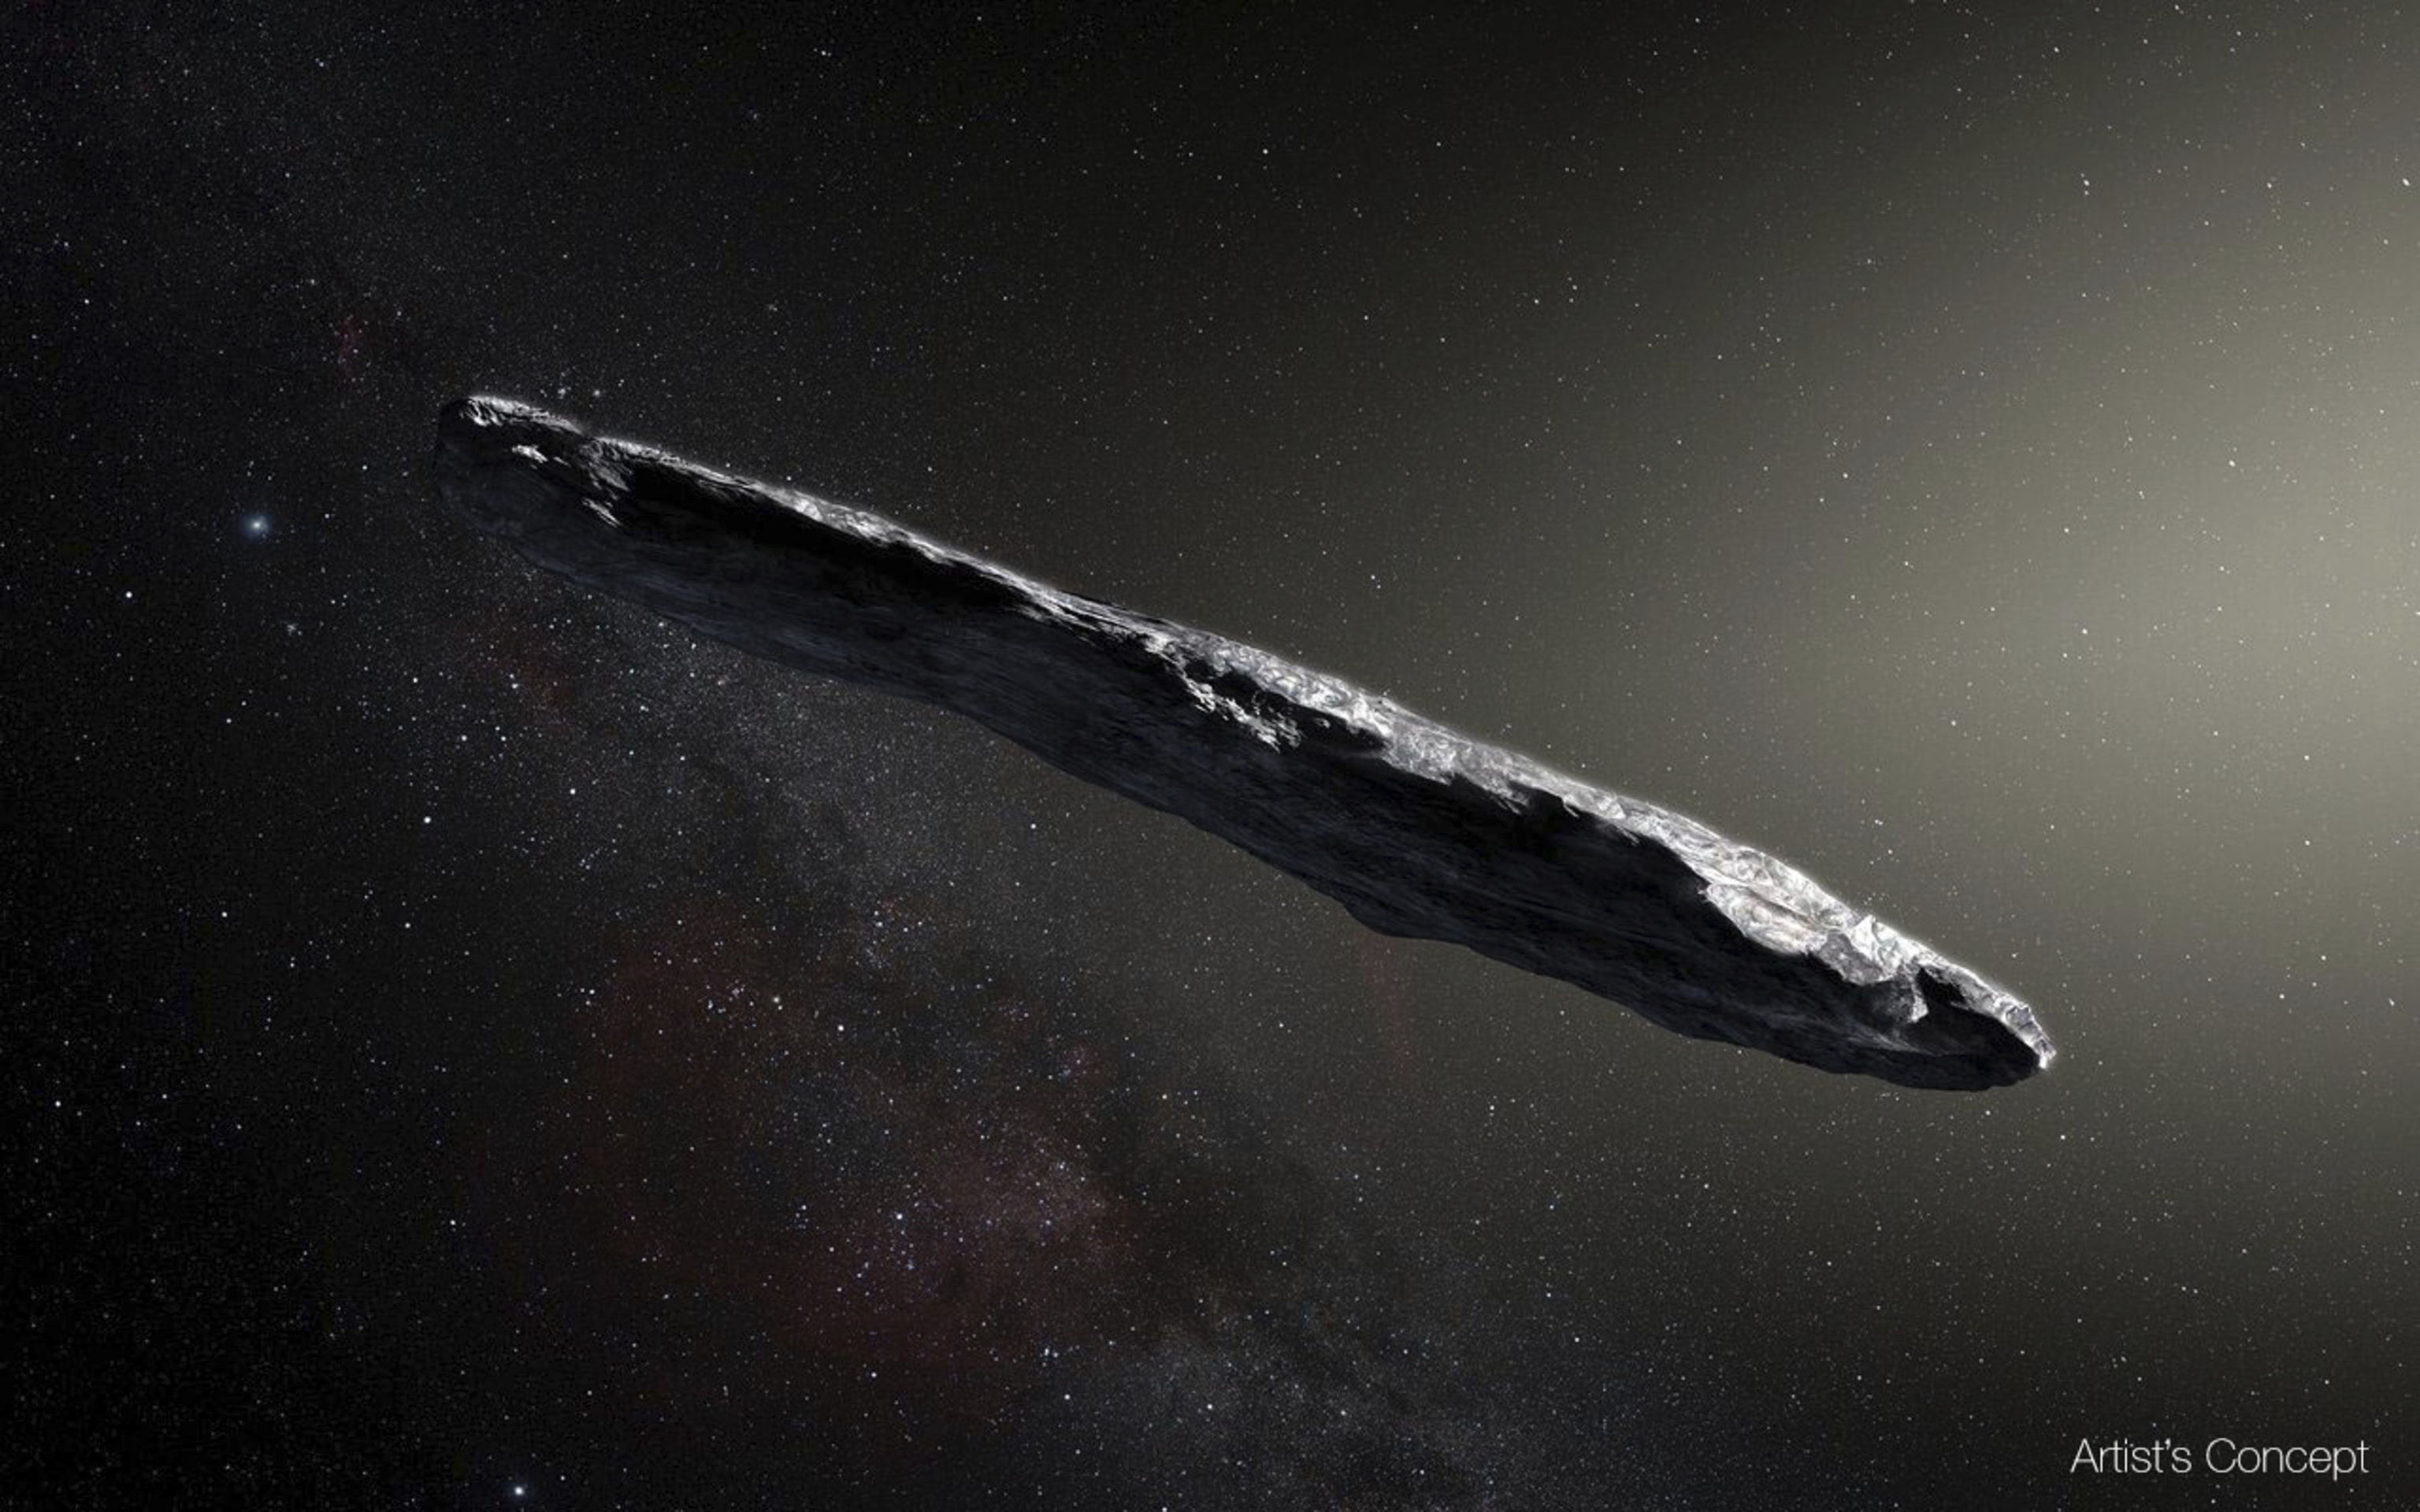 A truck-sized asteroid passes Earth in one of the closest approaches on record